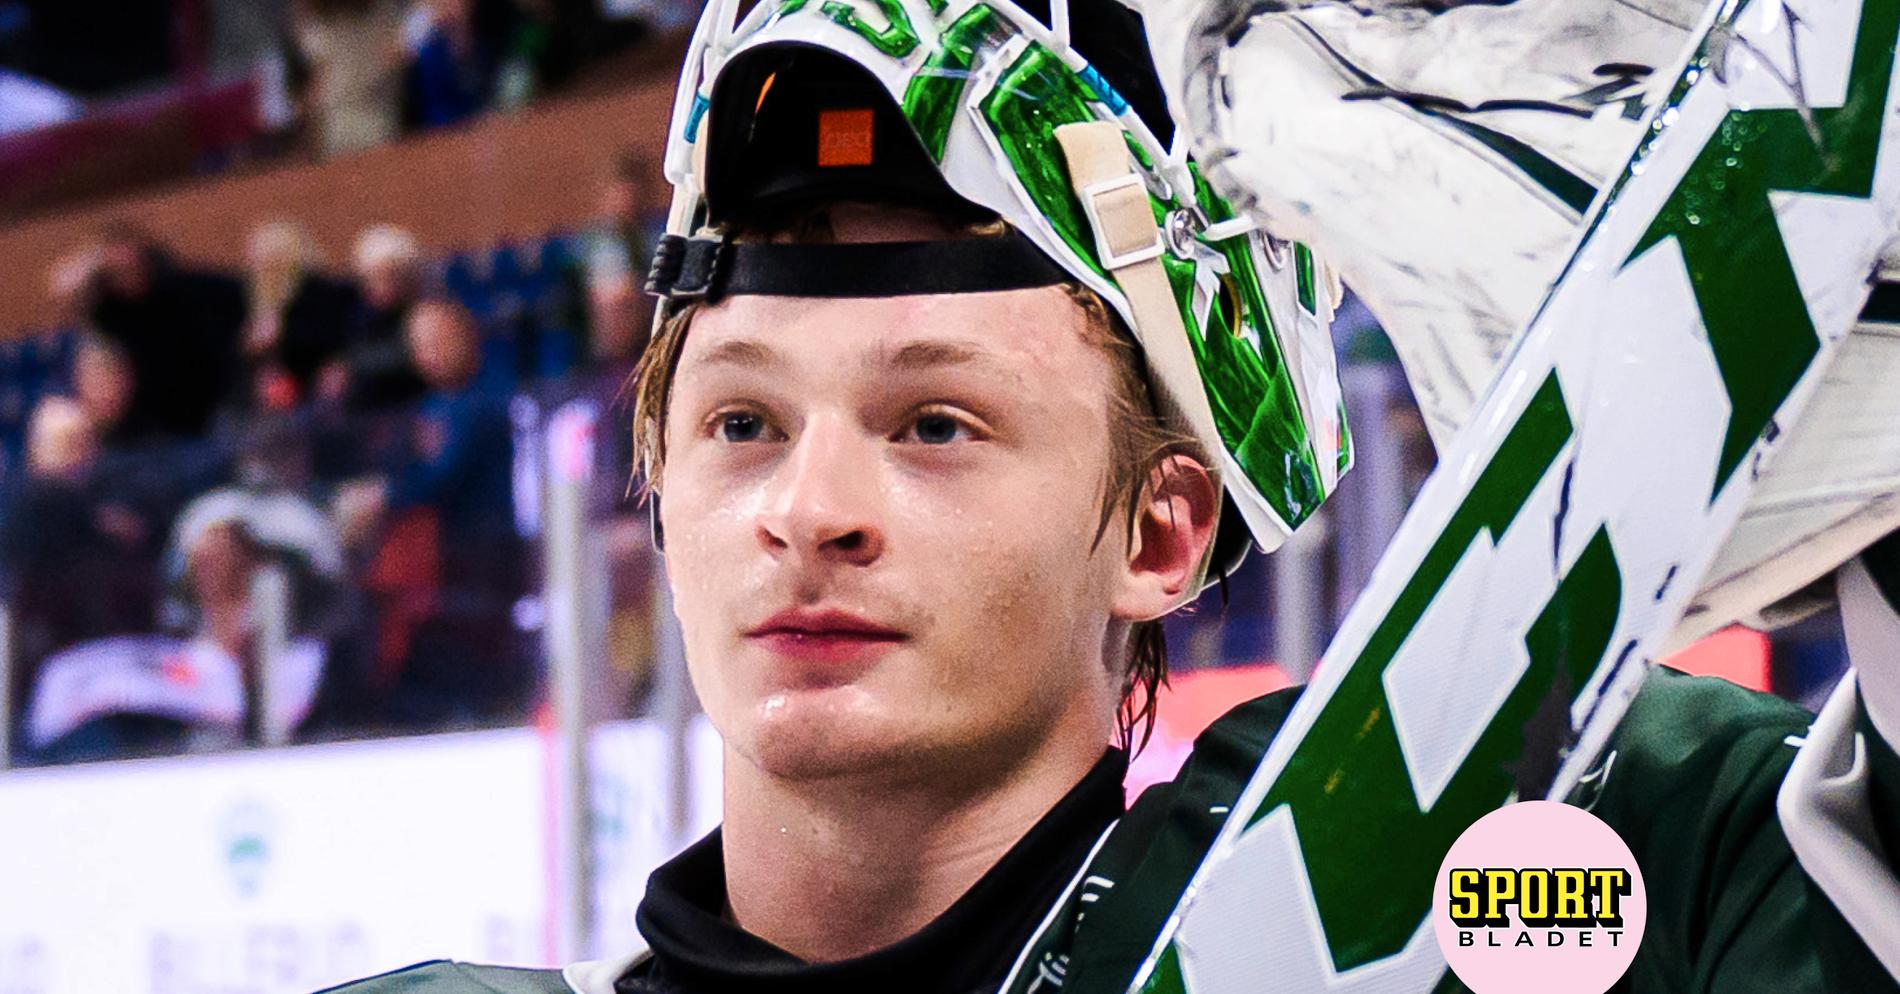 Carl Lindbom’s Impressive Start in the SHL: Three Wins and Three Goals Conceded